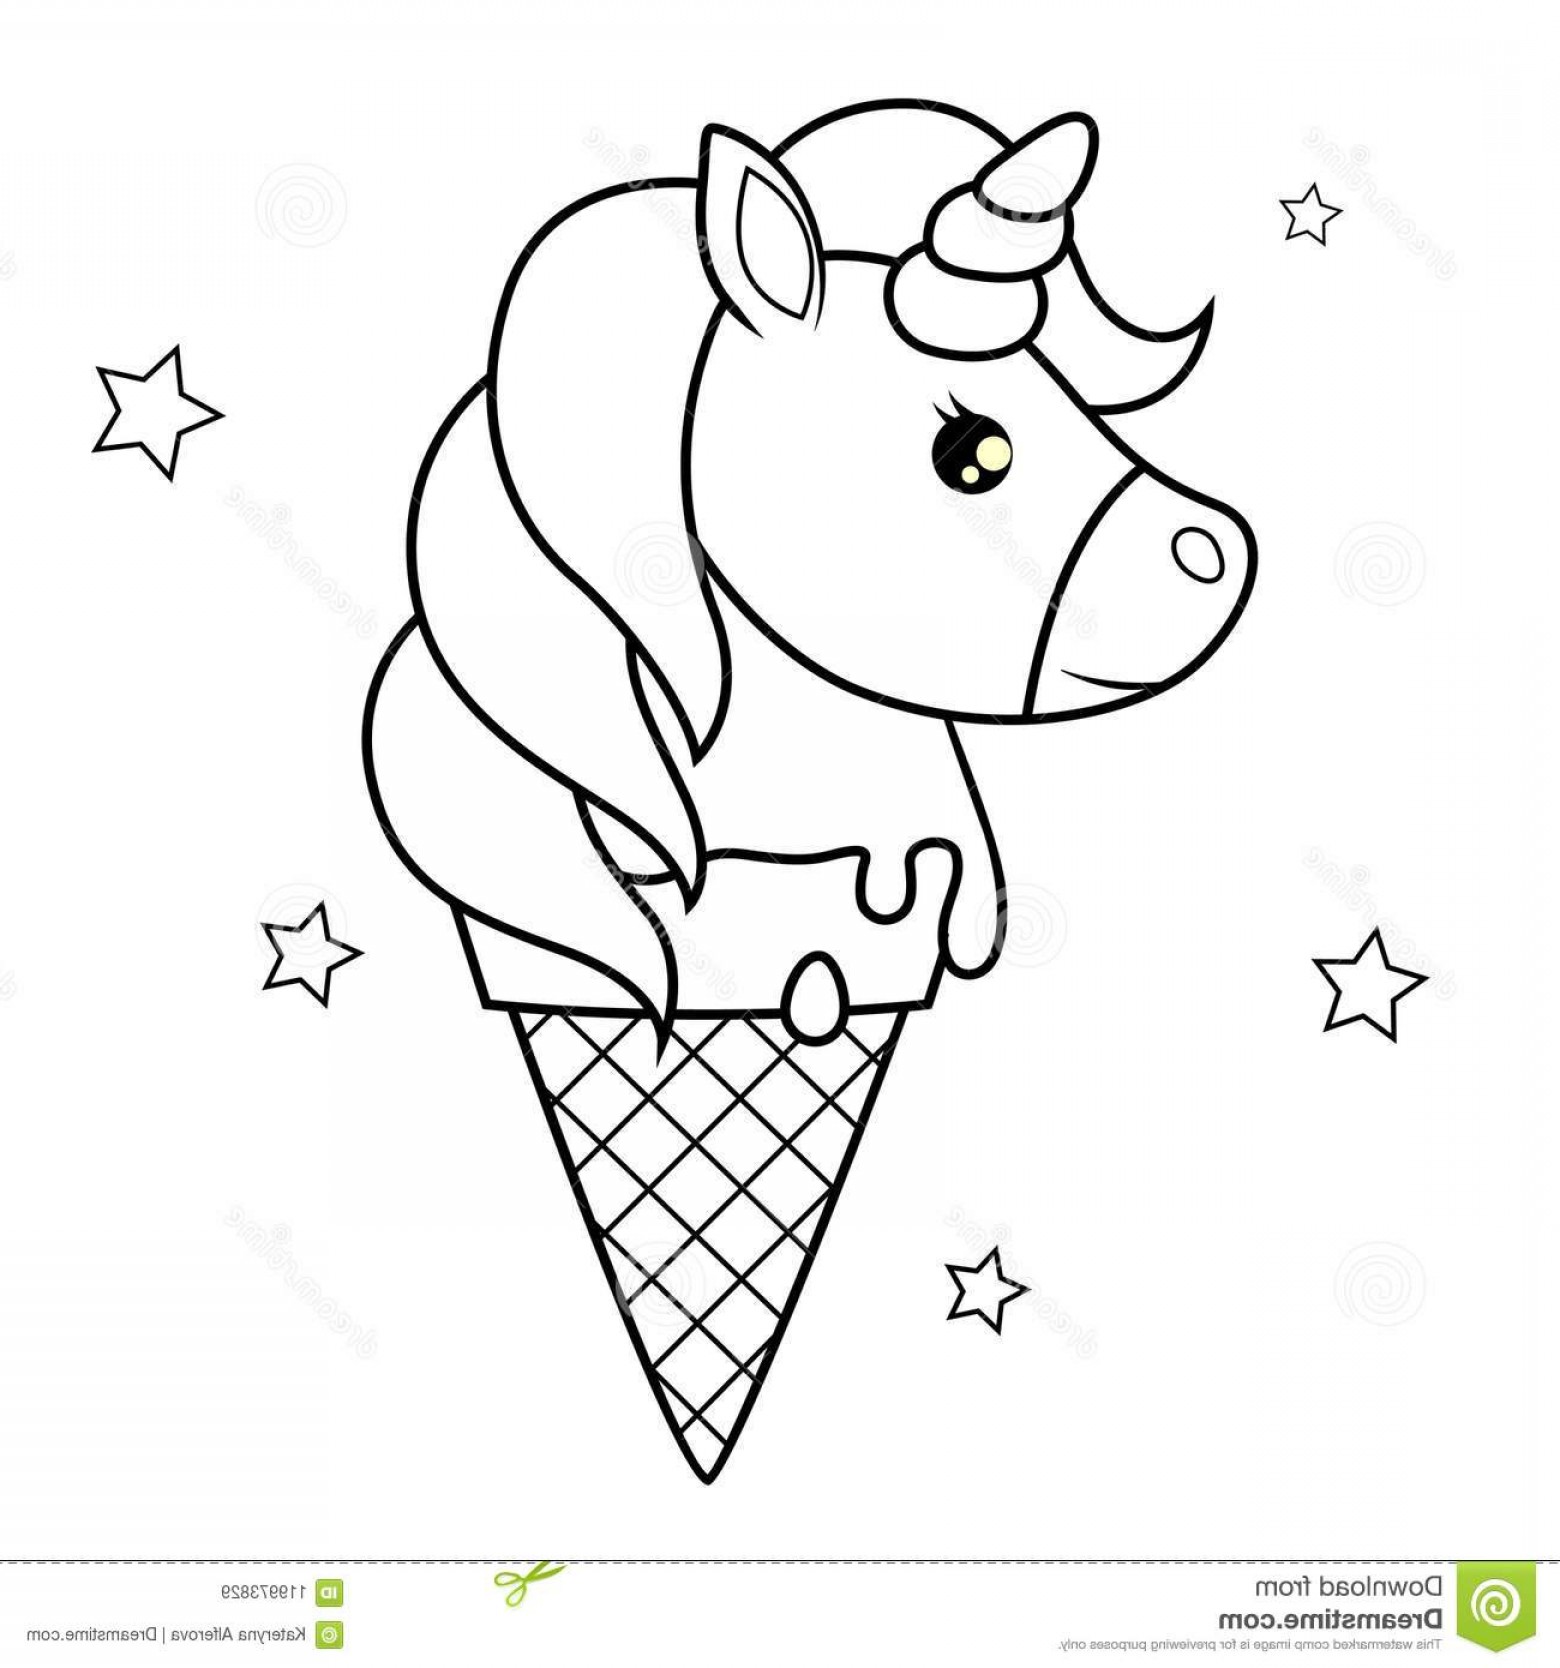 coloring book ~ Incredible Ice Cream Coloring Pages Picture Inspirations  Unicorn For Girls Preschool Cartoon Popsicle Incredible Ice Cream Coloring  Pages Picture Inspirations. Ice Cream Coloring Sheets. Popsicle Coloring  Pages For Preschoolers.